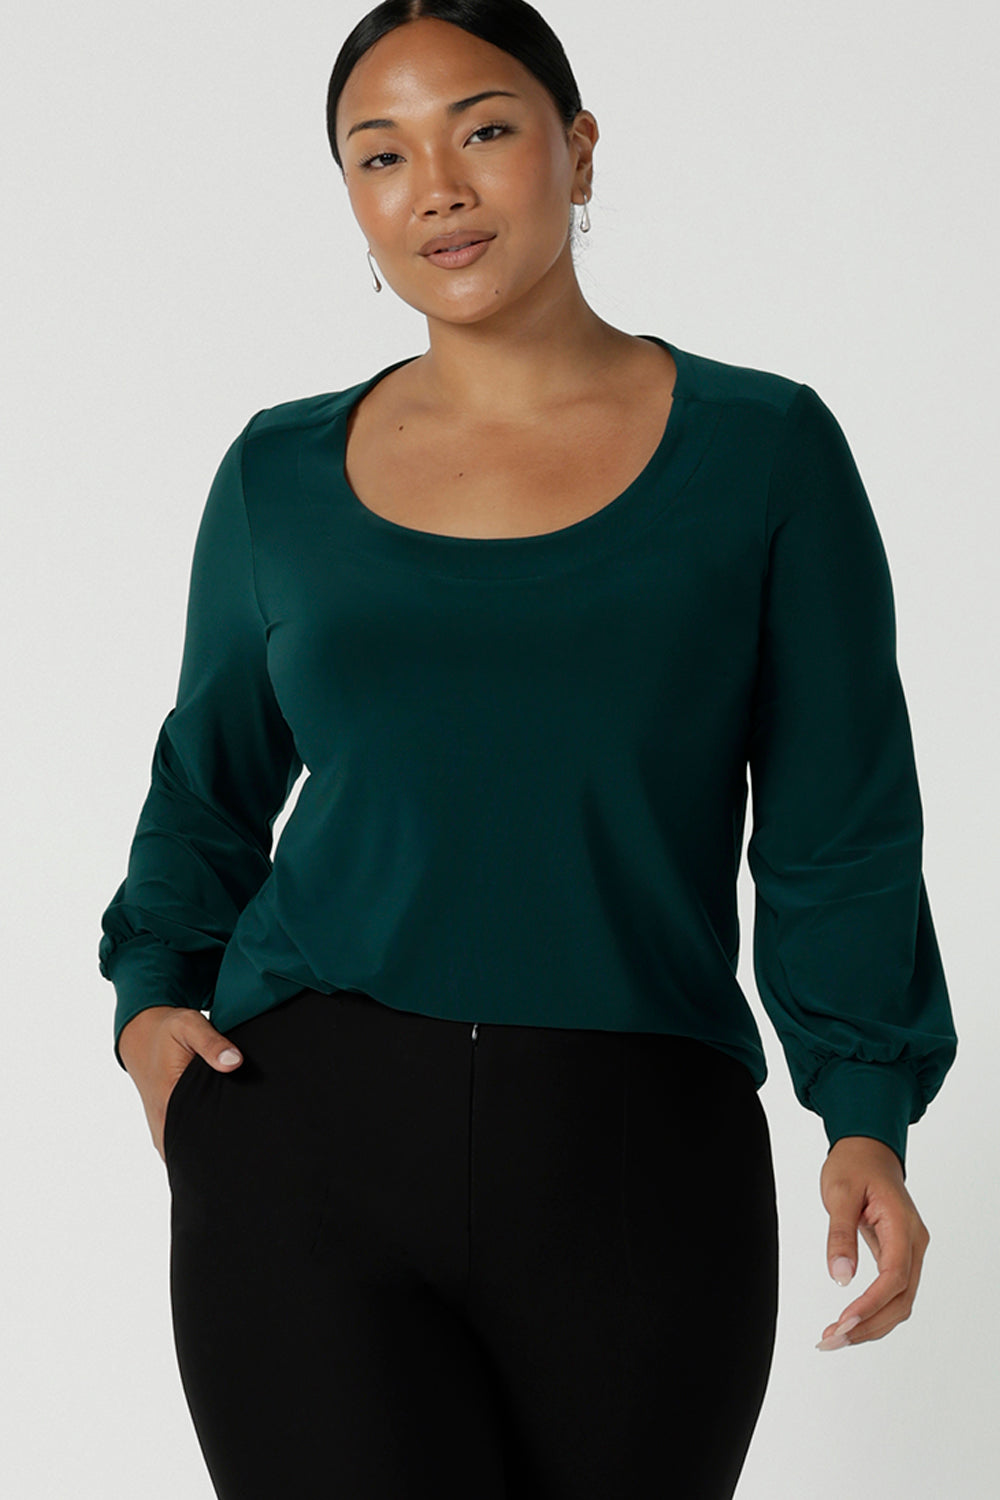 Size 10 woman wears the Jasper top in Aline. A work friendly style and made in Australia for women. Size 8 - 24.